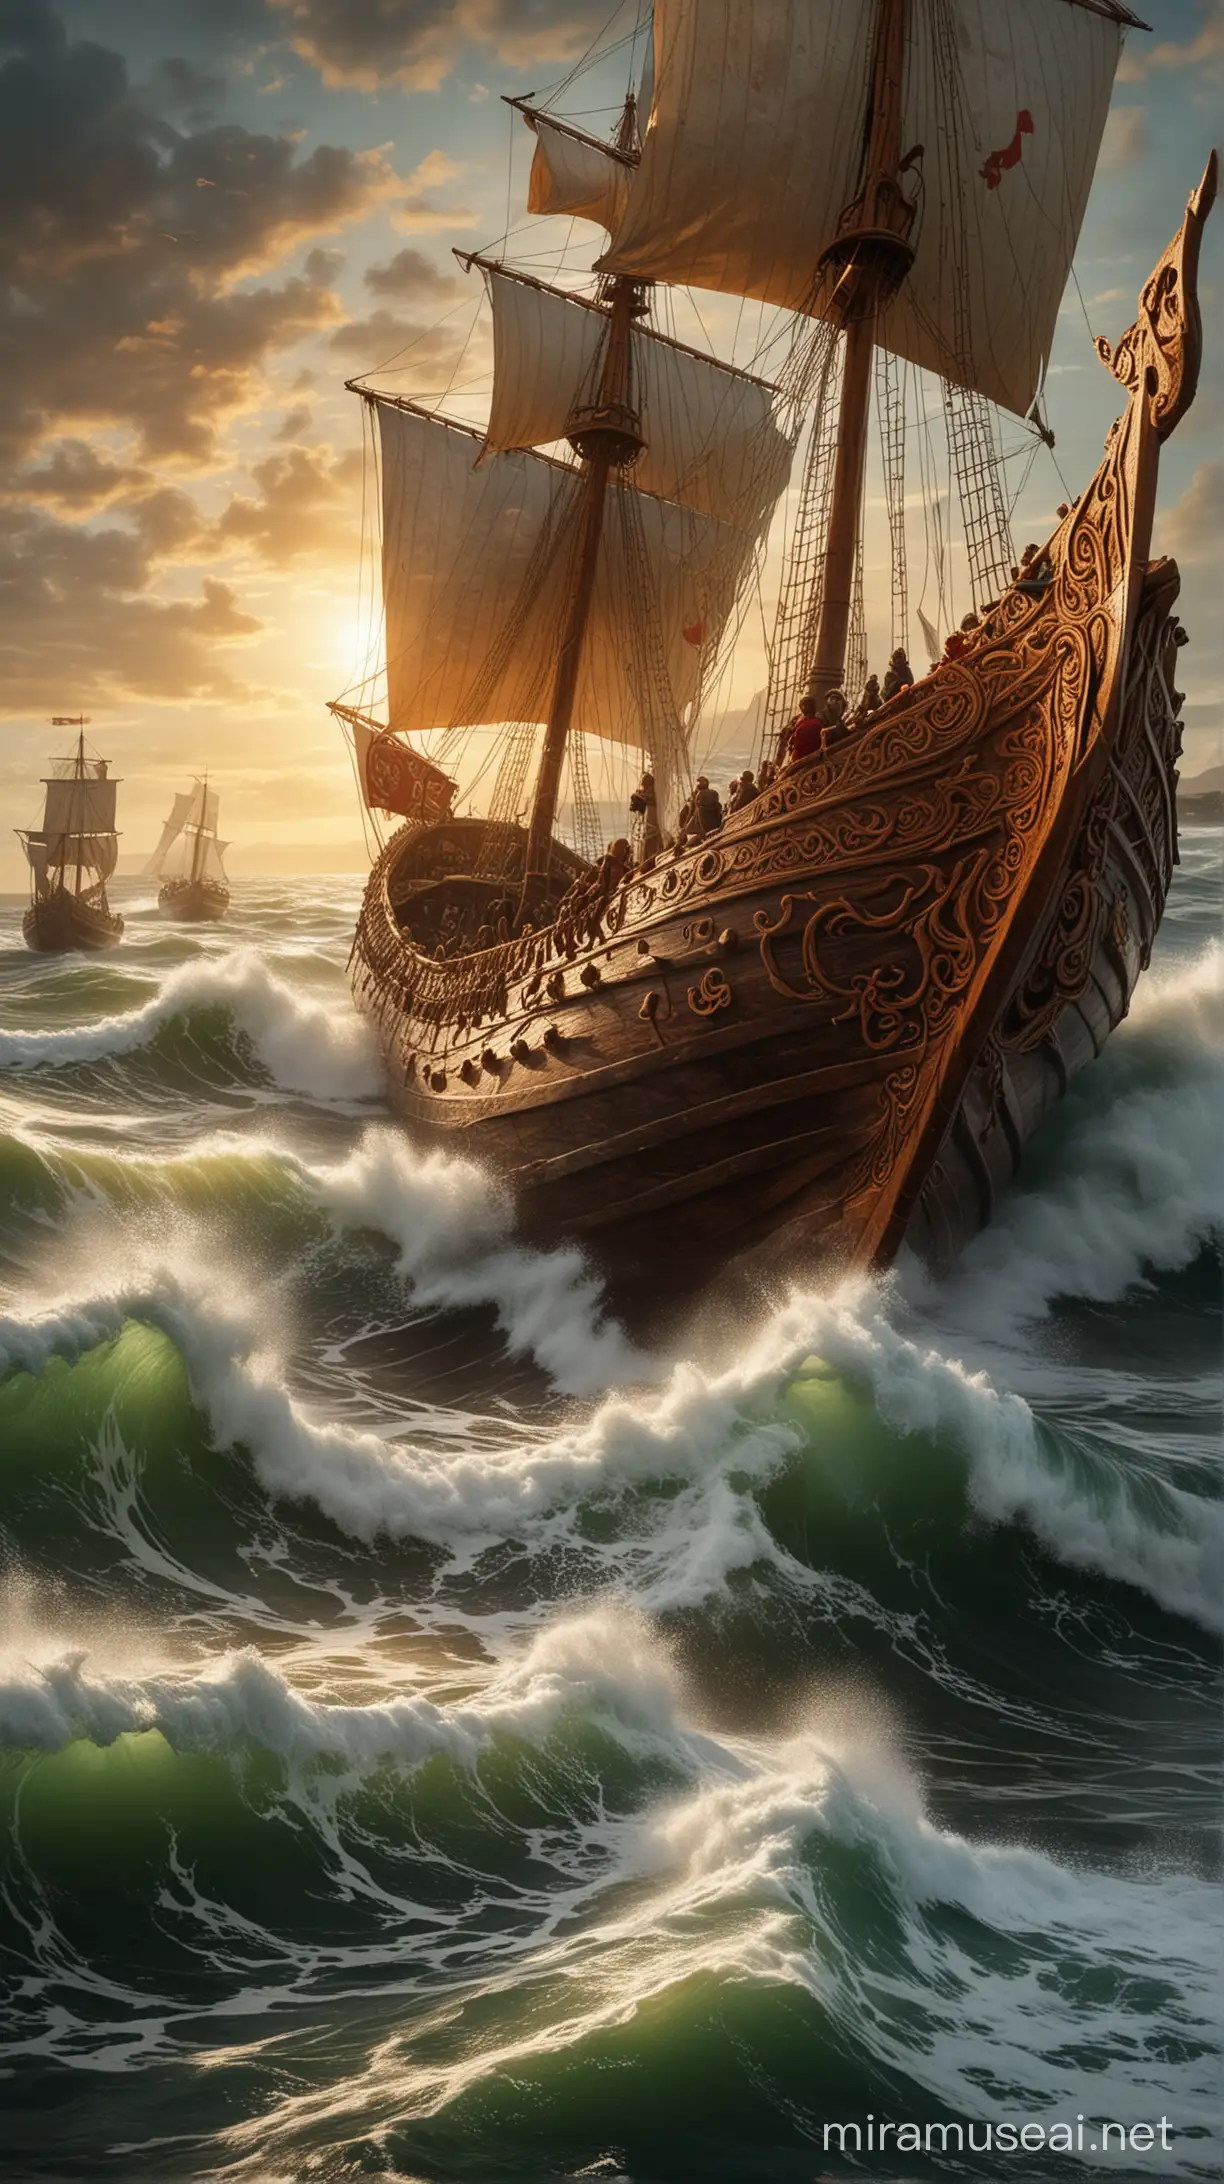 In the churning waves, the Viking ships flex with an almost sentient grace, the wood creaking and bending as they navigate the turbulent waters. This striking image, possibly a vivid painting, captures the essence of these majestic vessels in action. Each ship is adorned with intricate carvings and colorful sails billowing in the wind, showcasing their strength and resilience in the face of nature's fury. The scene is bathed in a golden light, illuminating the ships' sleek lines and powerful presence, making it a truly mesmerizing sight to behold.